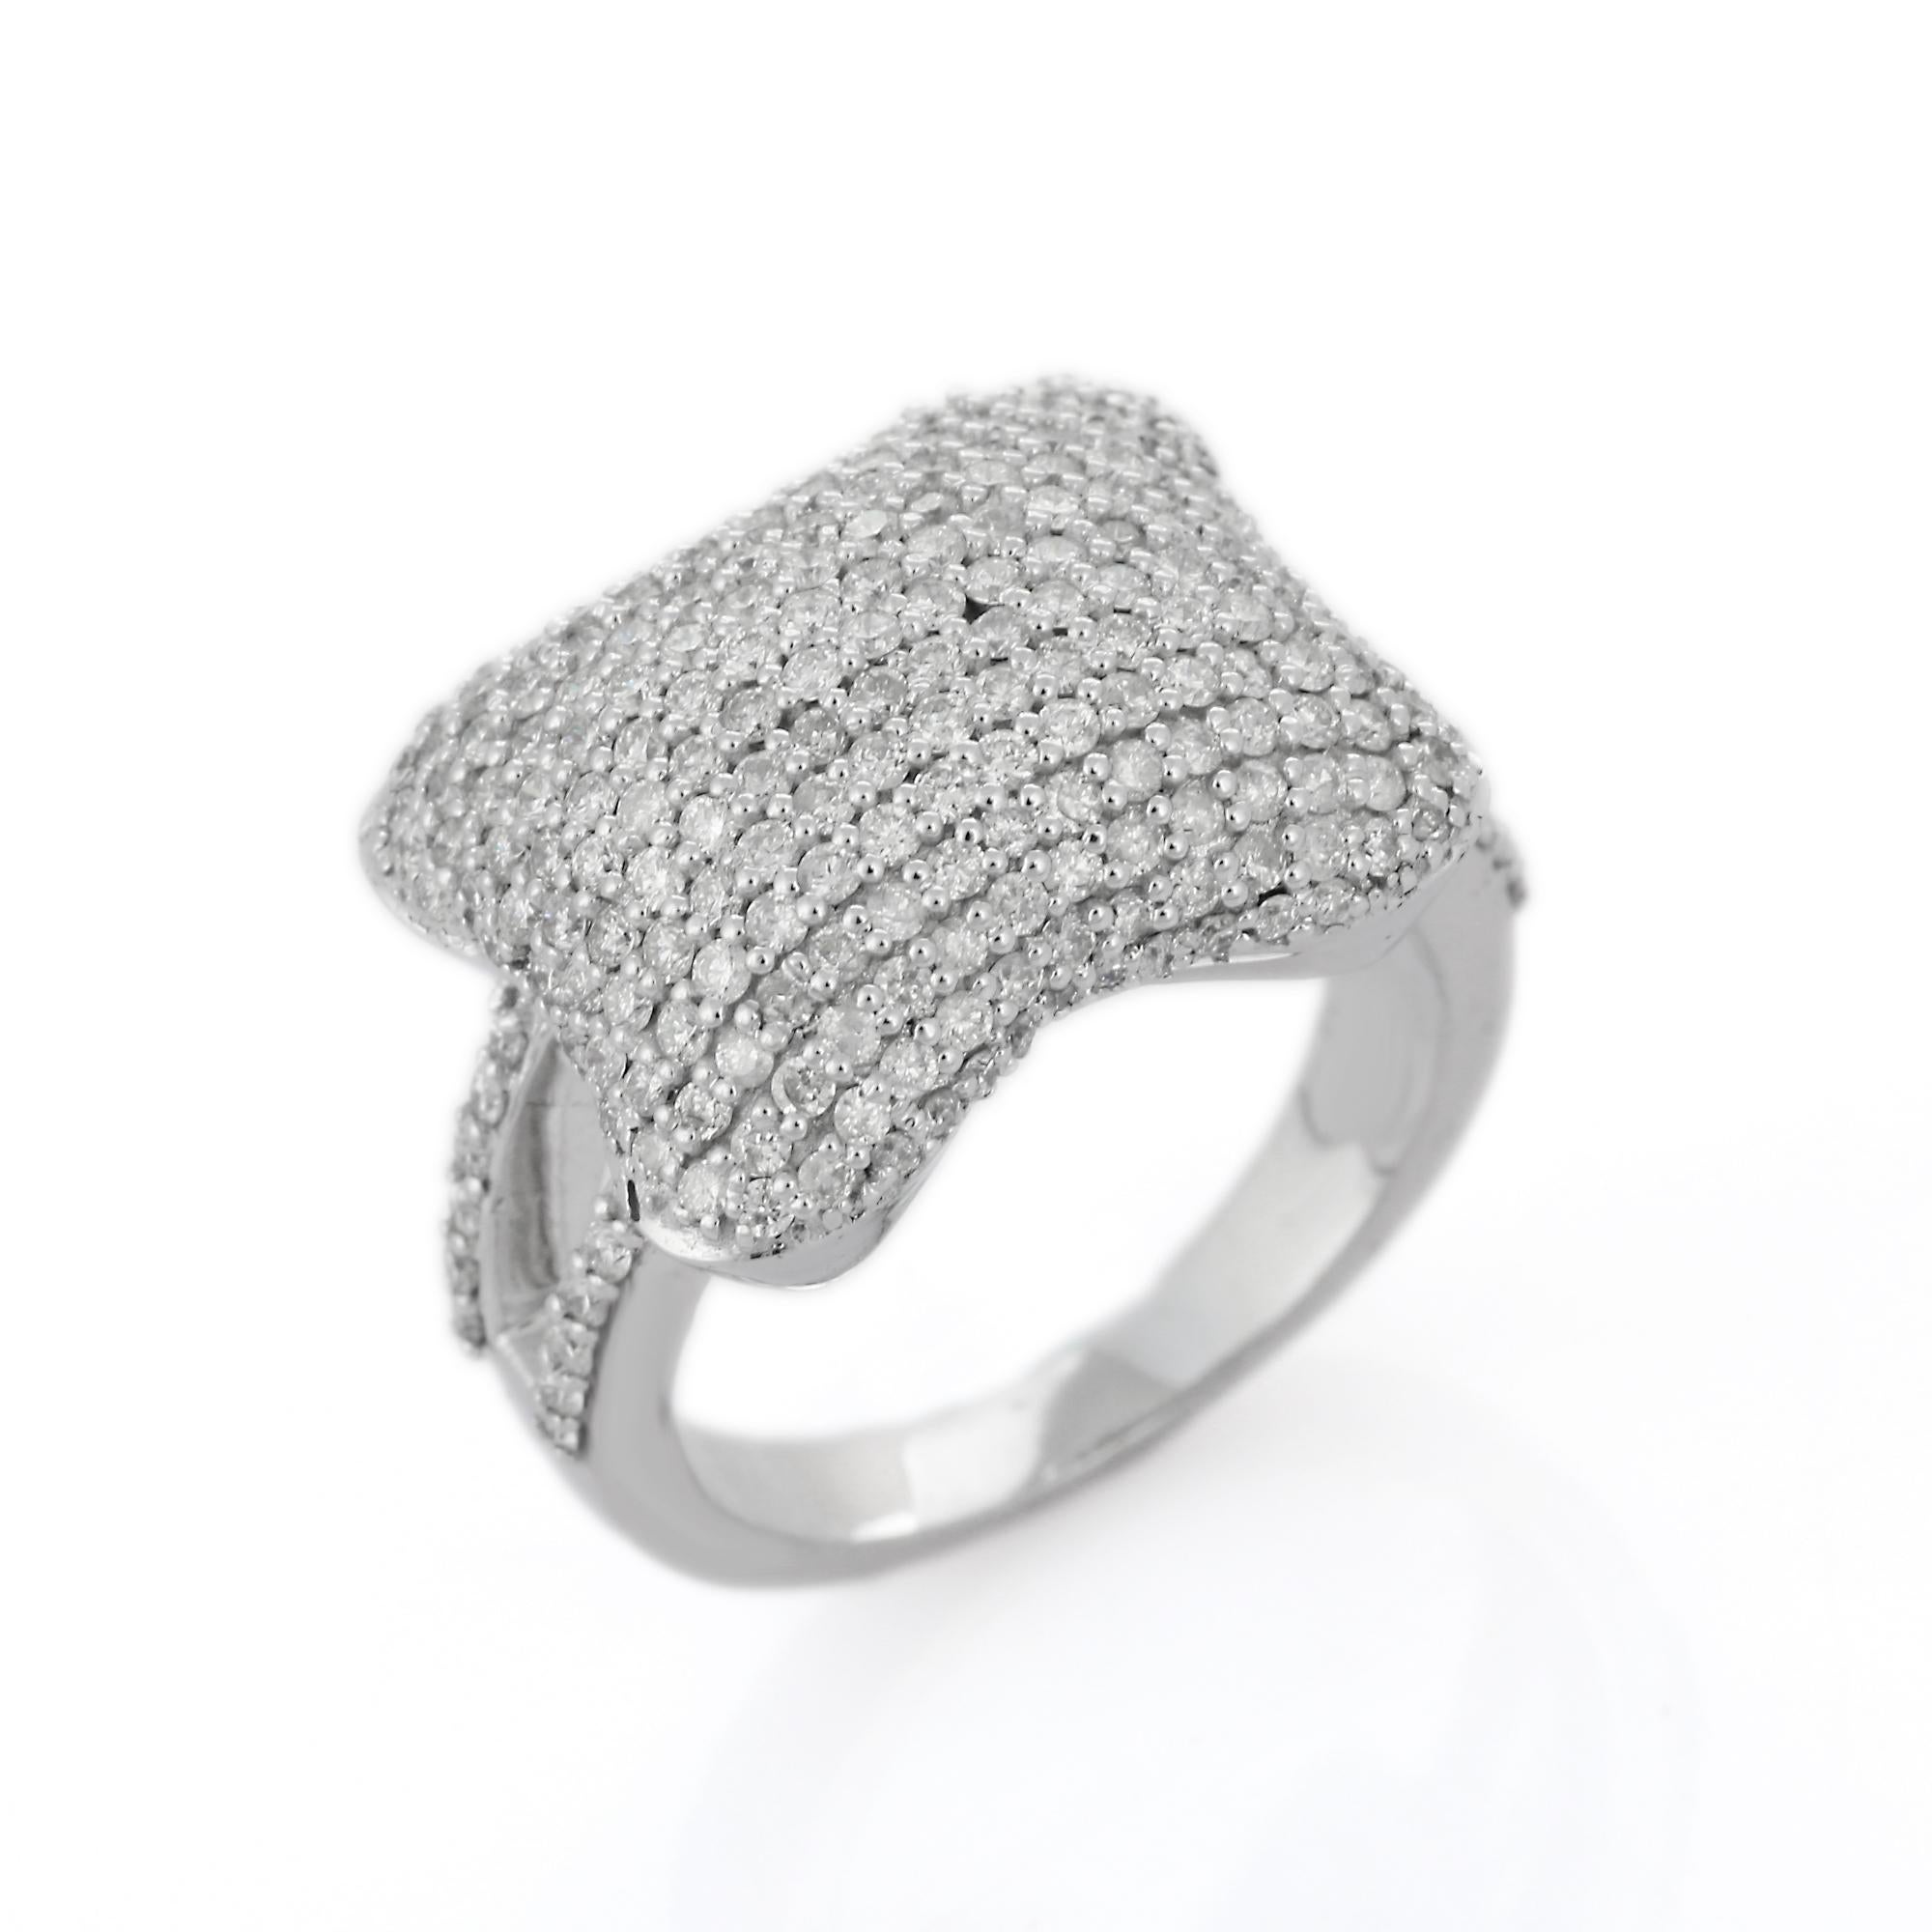 For Sale:  Certified 1.91 Carat Diamond Statement Ring in 18K White Gold 8